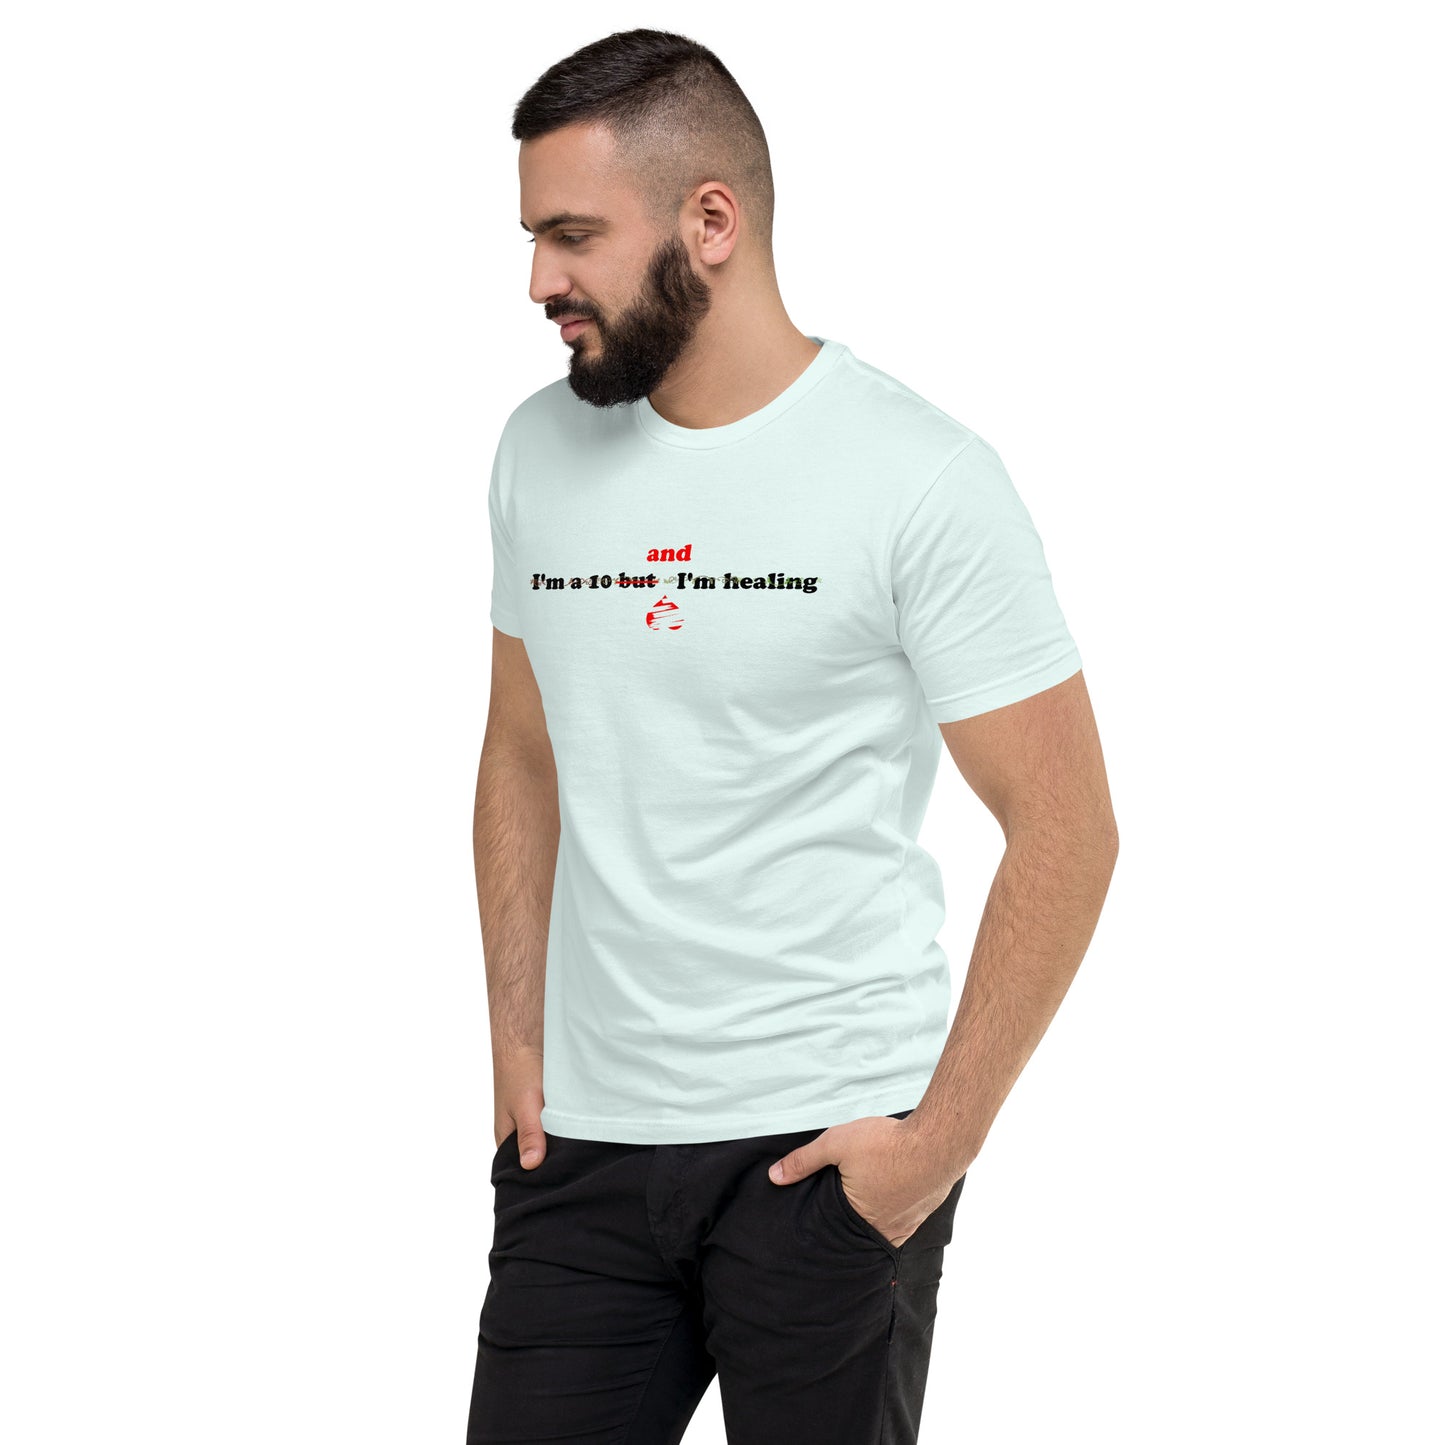 I'm a 10 and I'm Healing:  Short Sleeve Cotton T-shirt